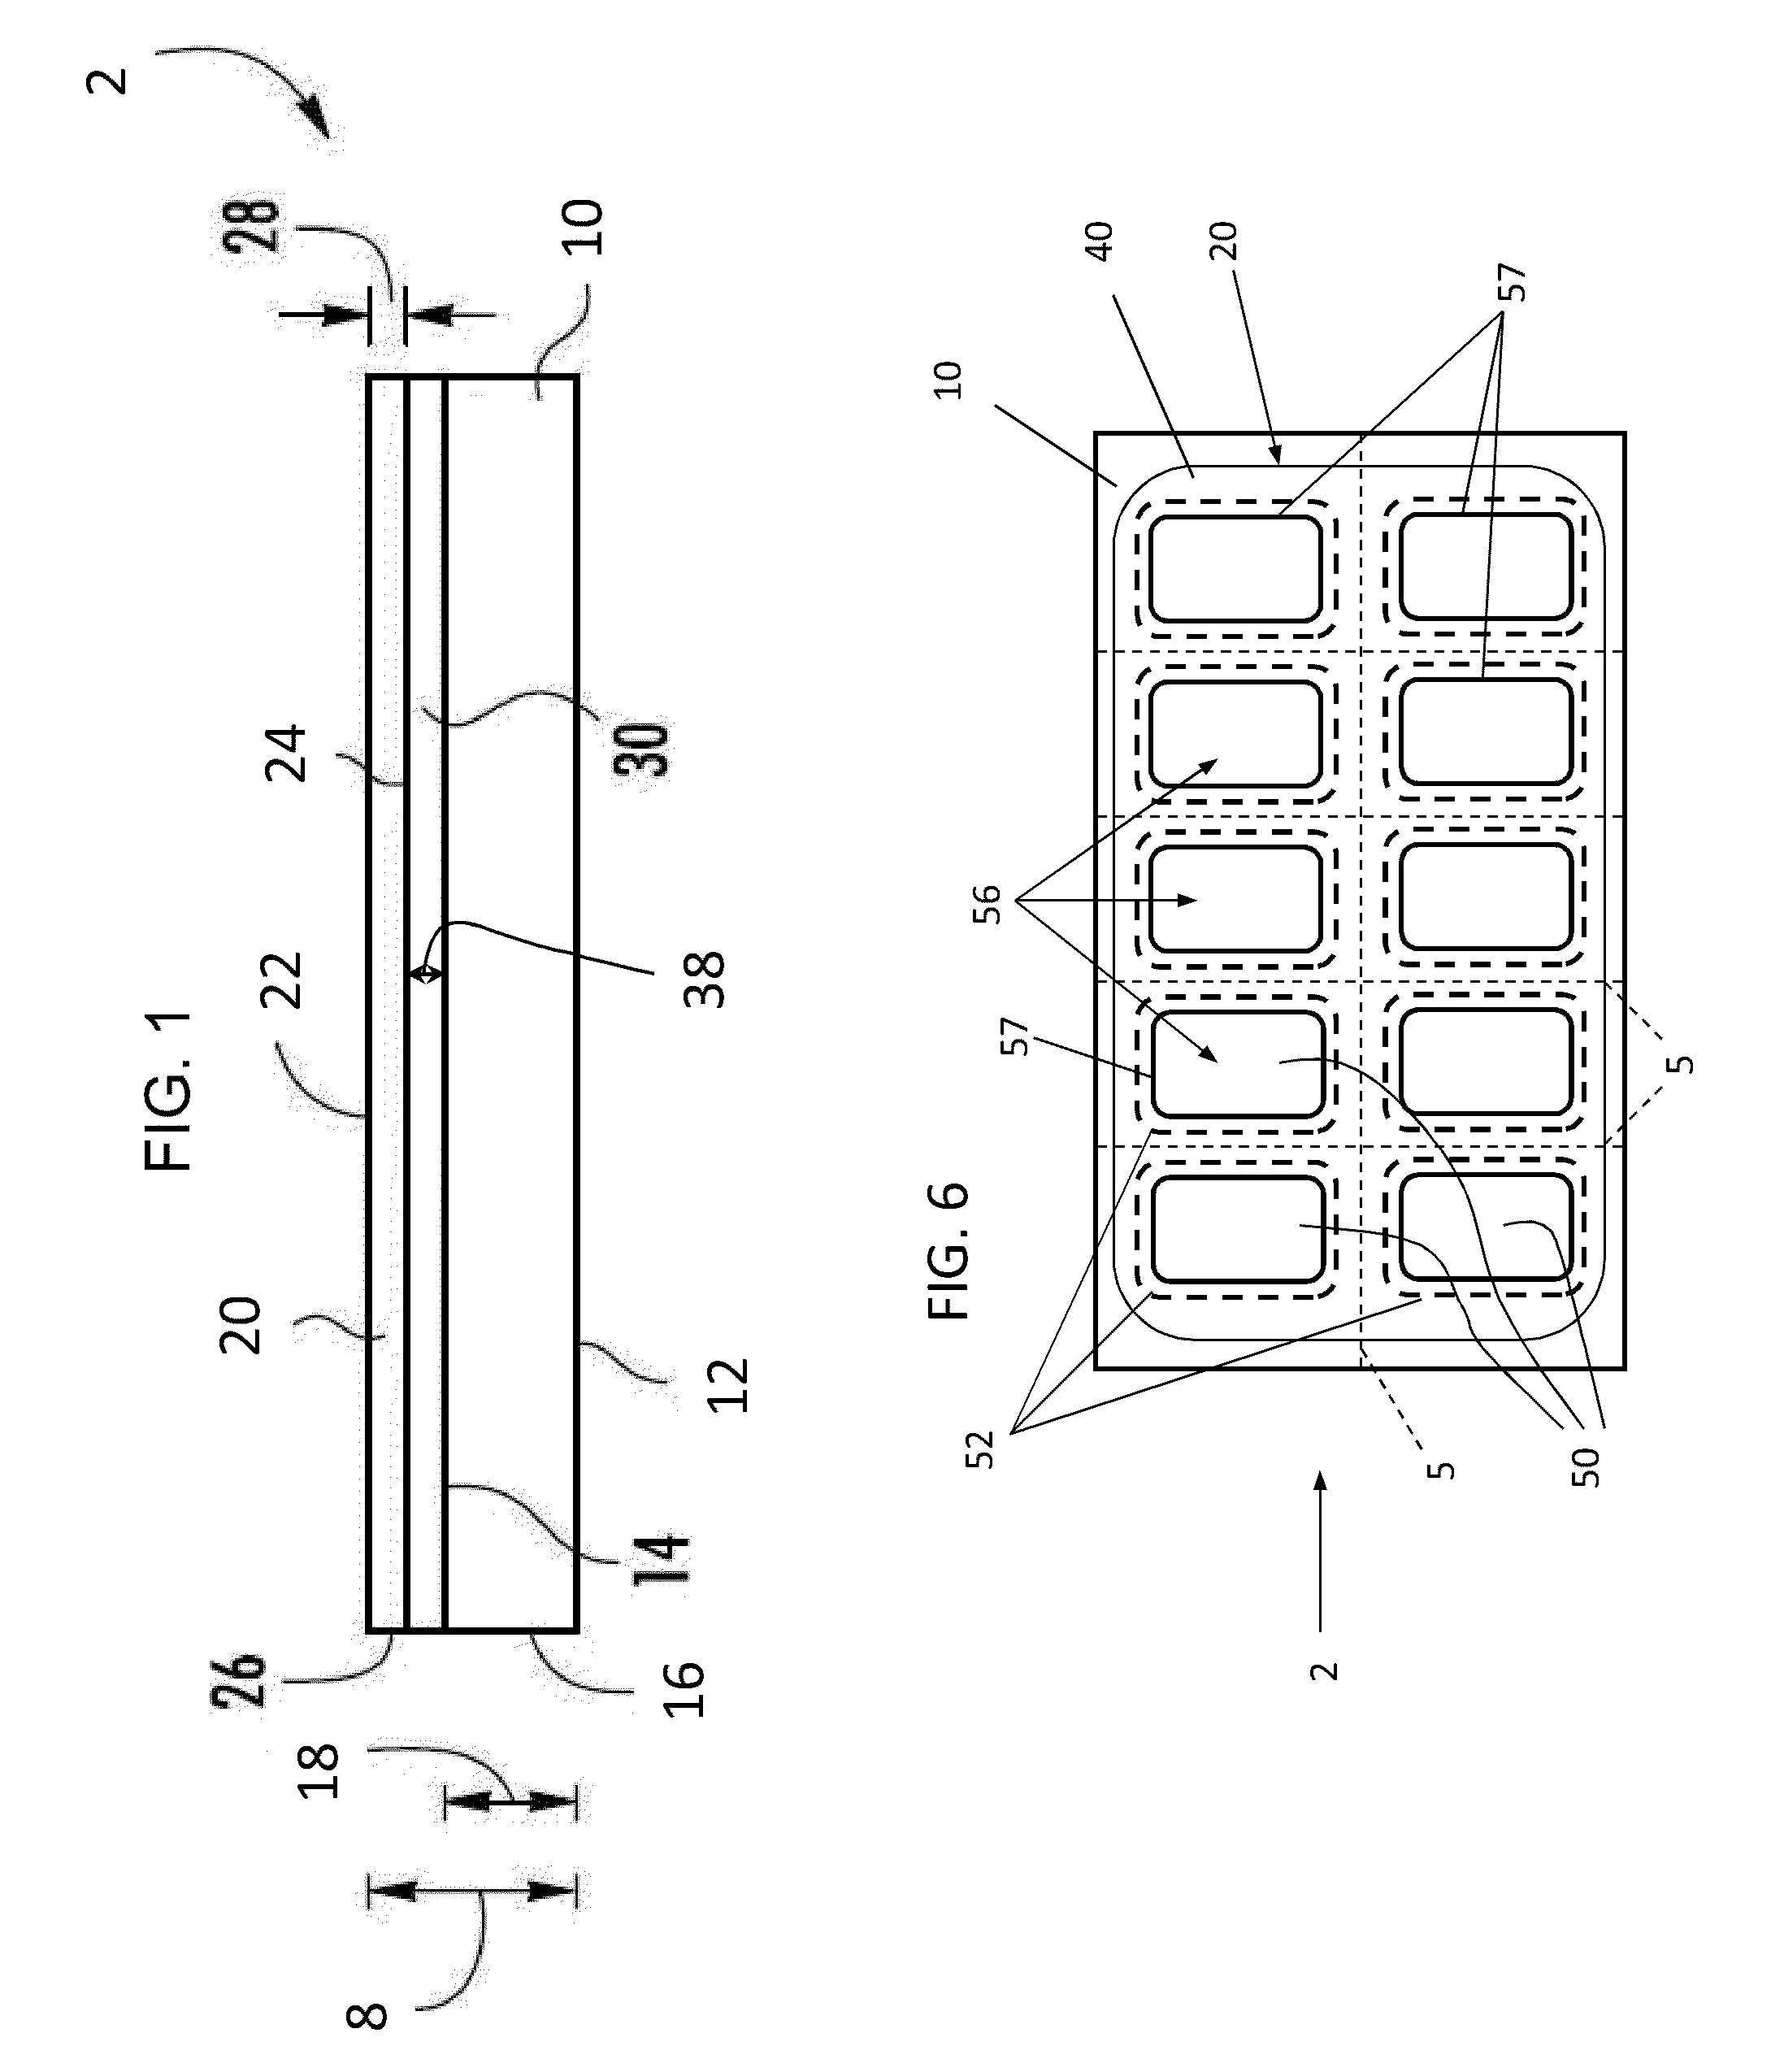 Methods for processing OLED devices